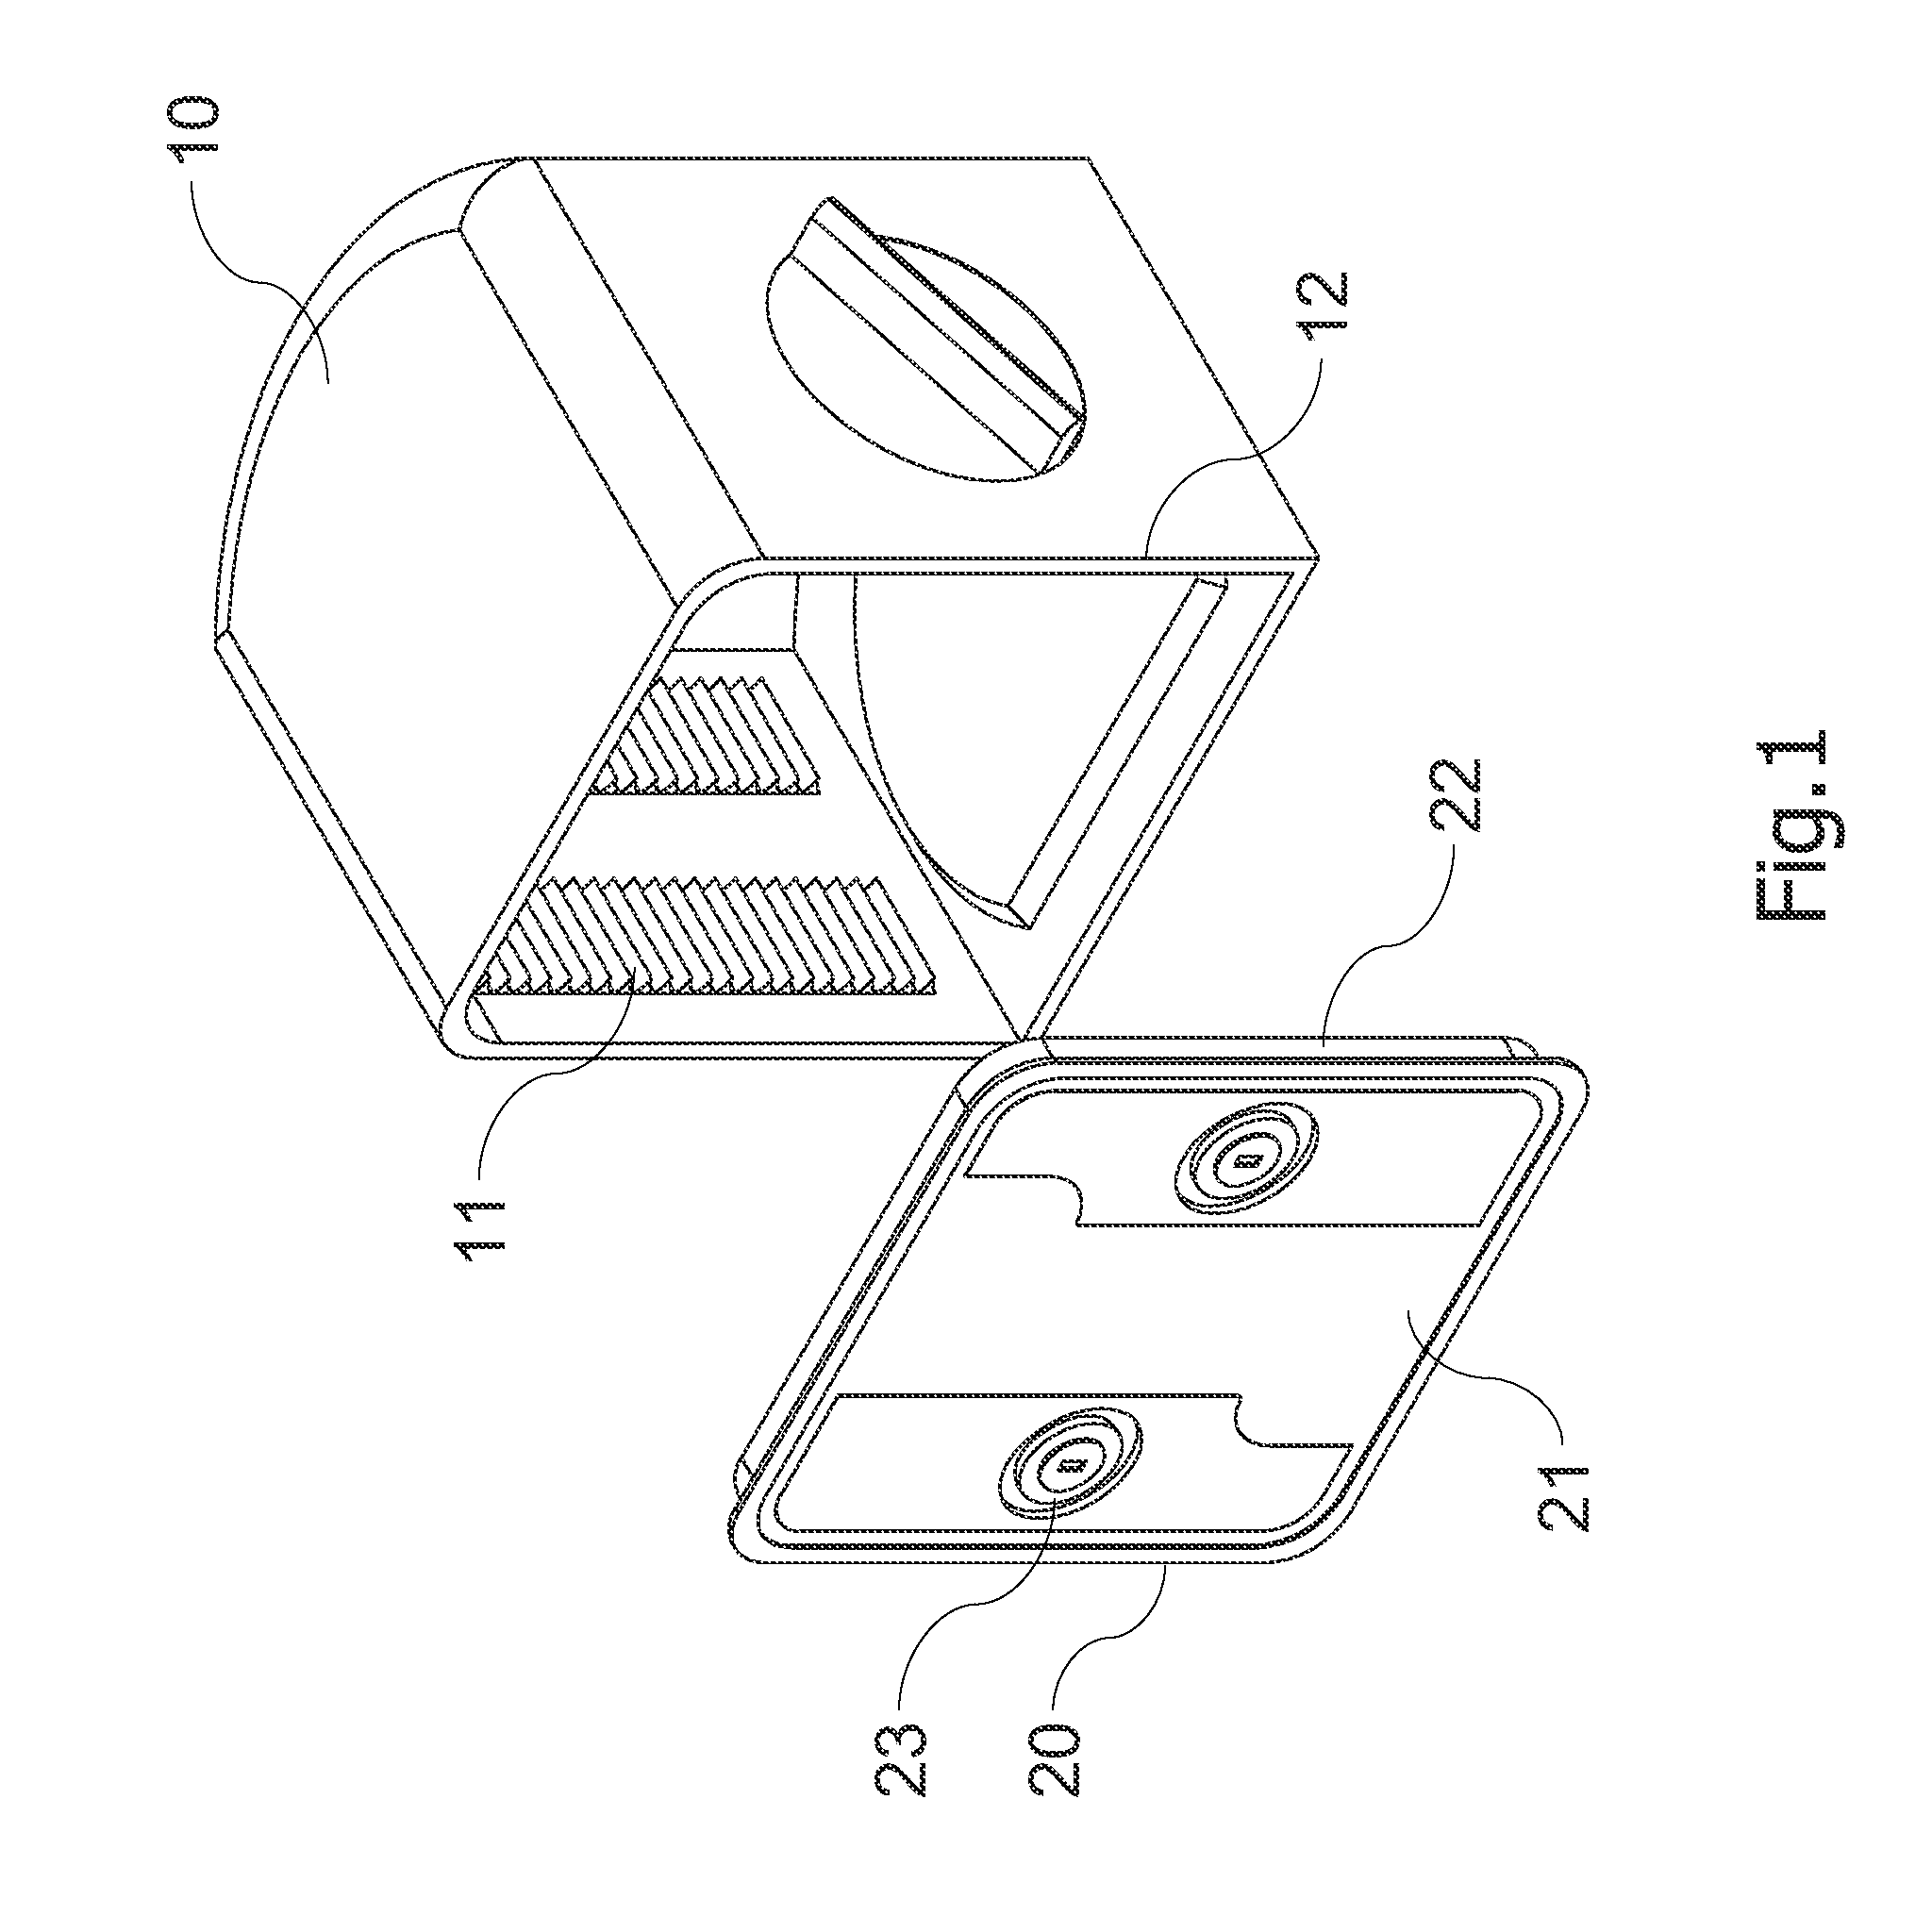 Wafer container with elasticity module